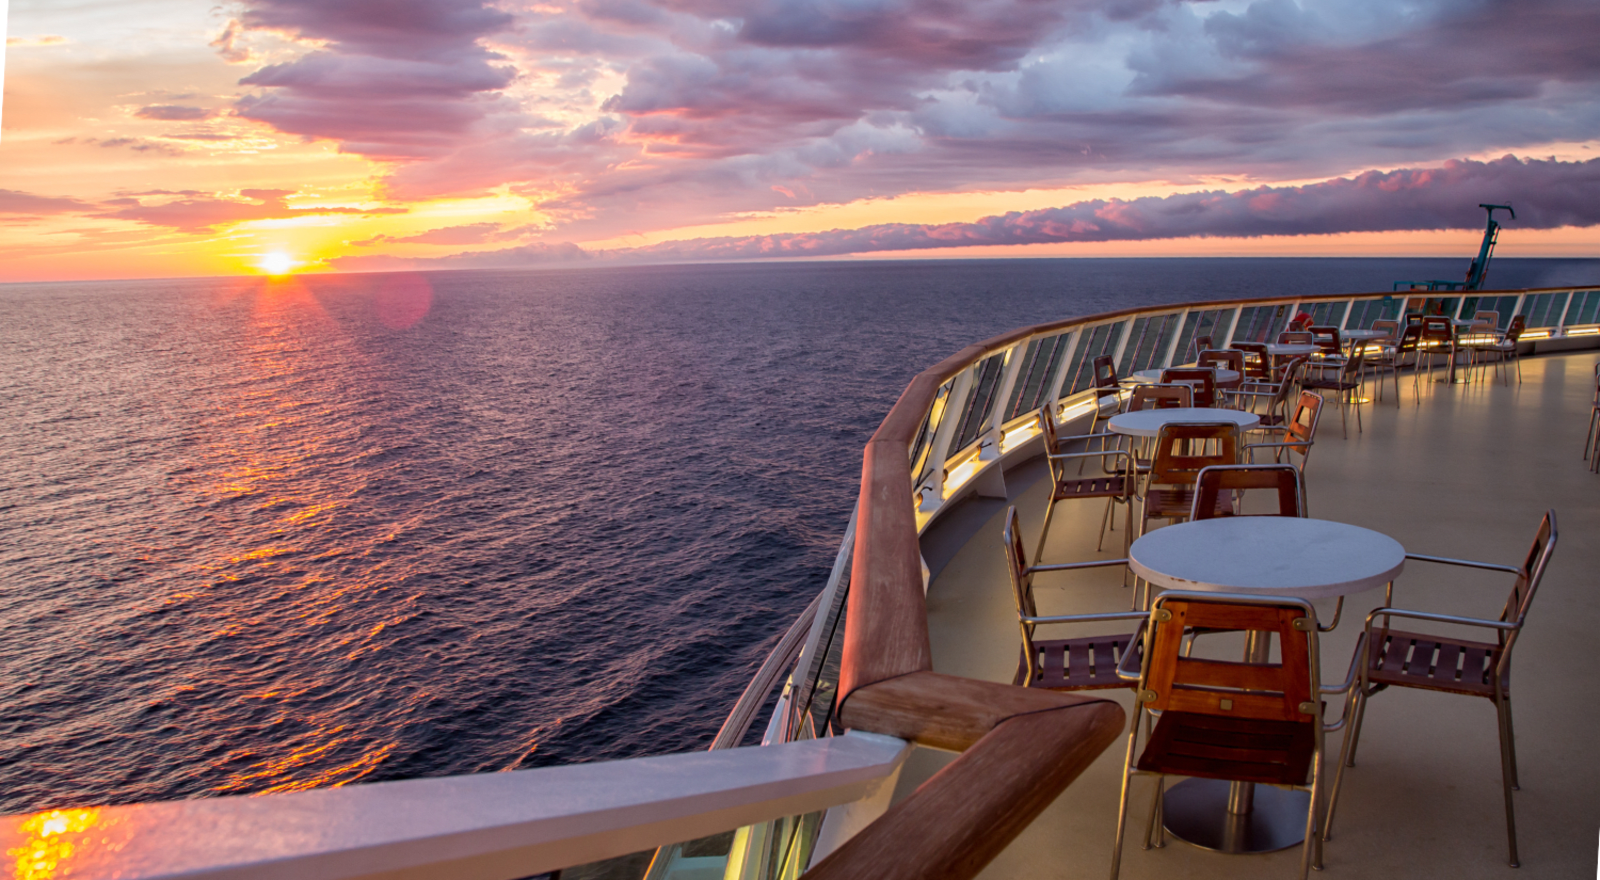 sunset from deck of a cruise ship